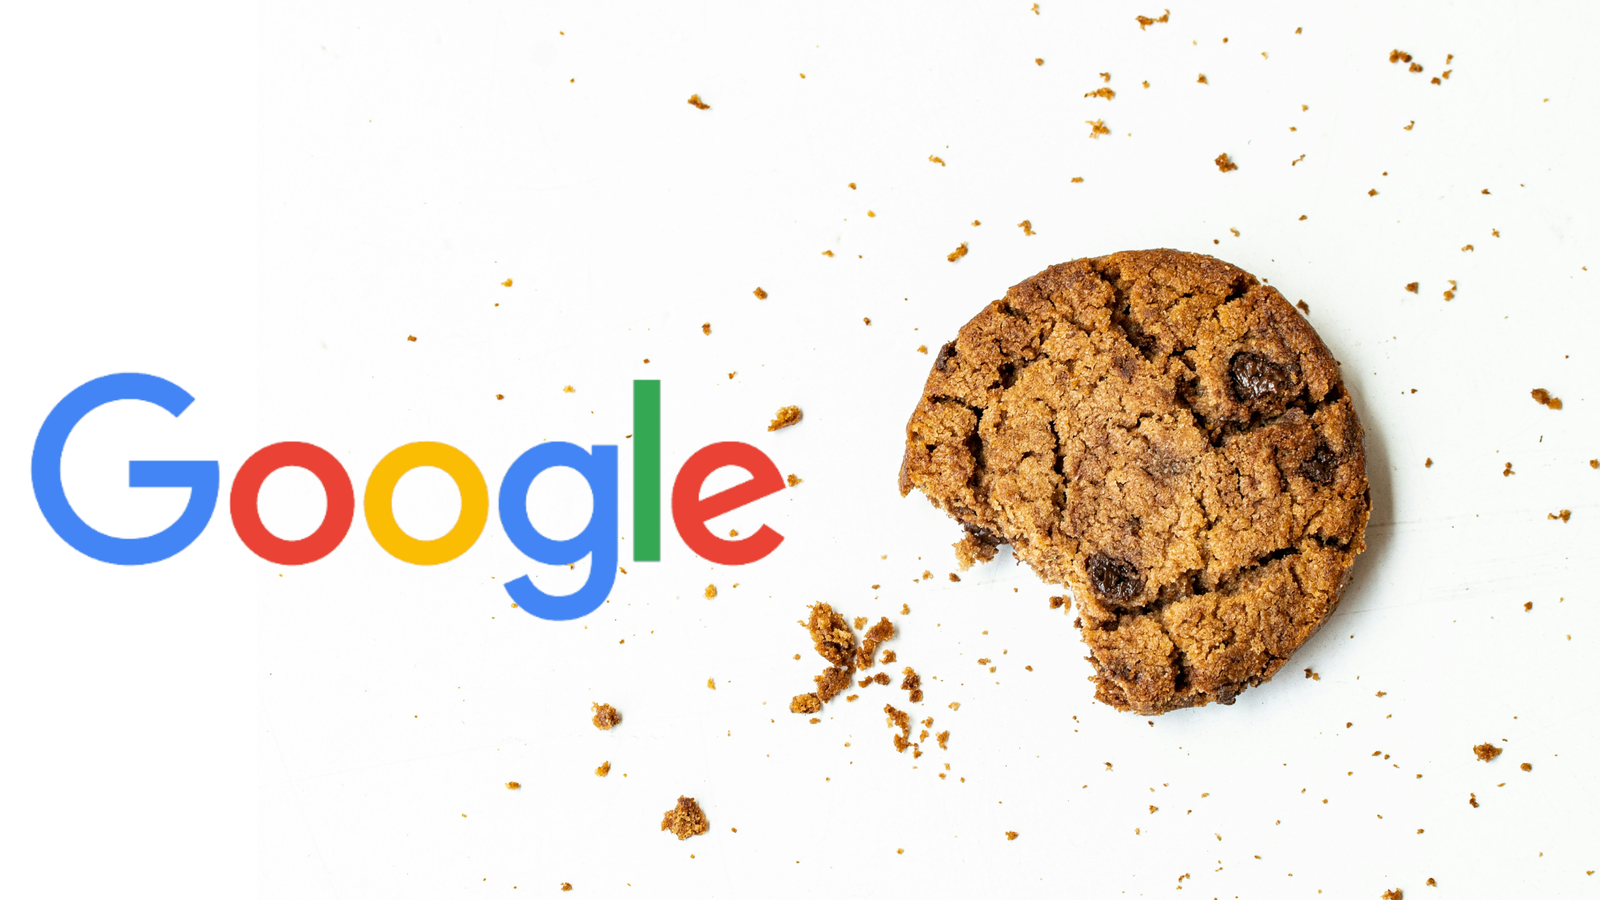 google logo and cookie 